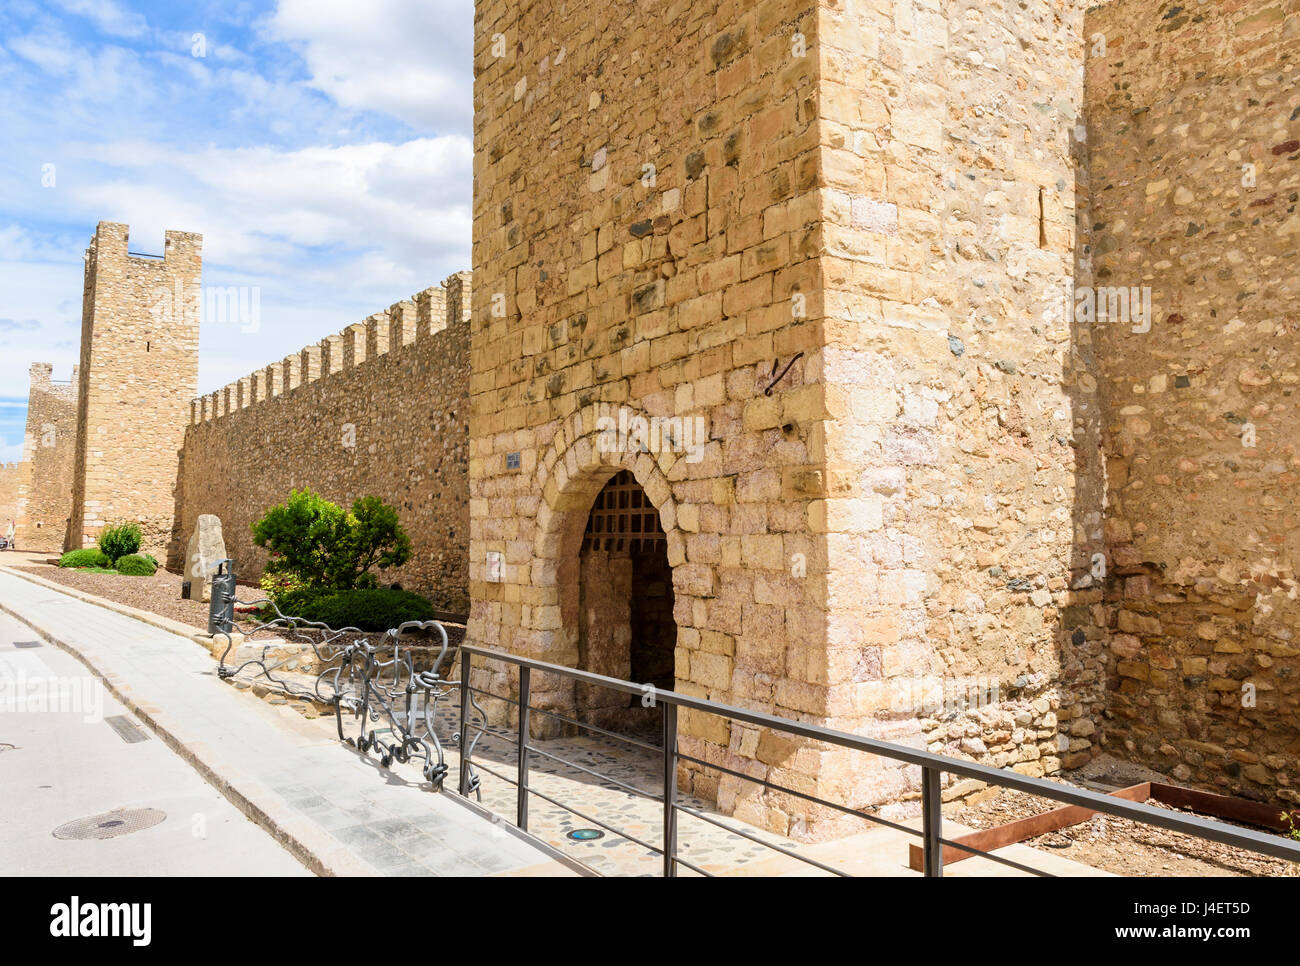 Sant Jordi tower-gate, famed for the legend of where St George killed the dragon, Montblanc, Tarragona, Catalonia, Spain Stock Photo